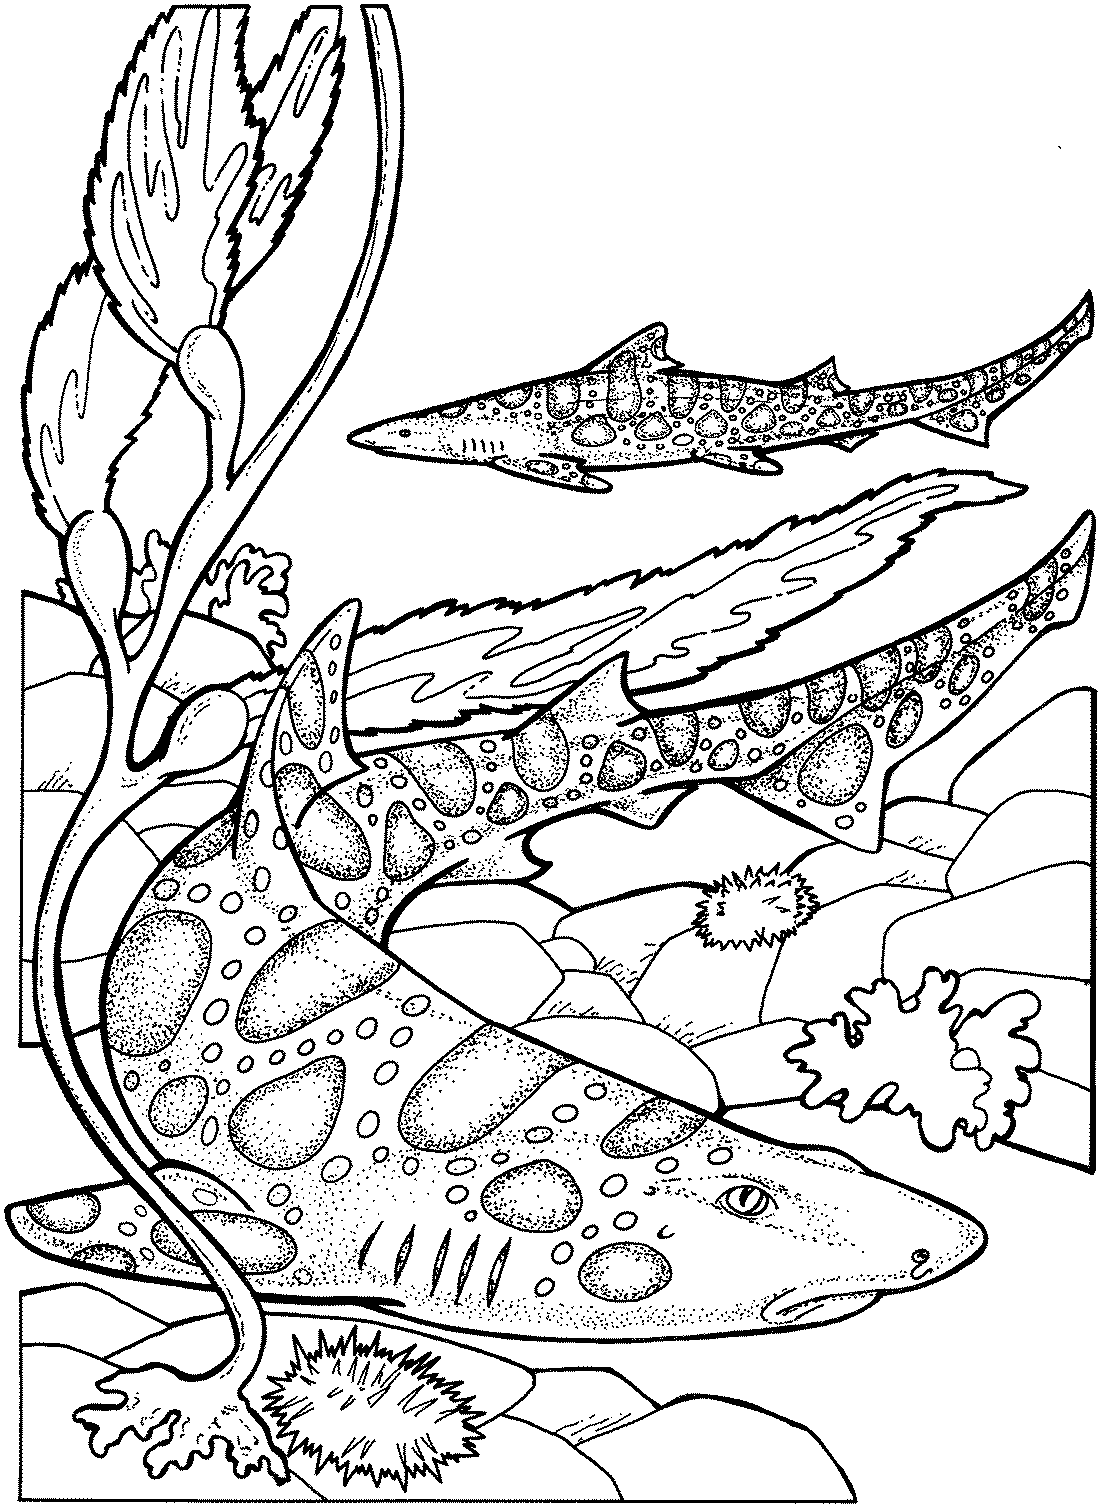 free printable shark coloring pages free shark line art download free clip art free clip art printable free coloring shark pages 